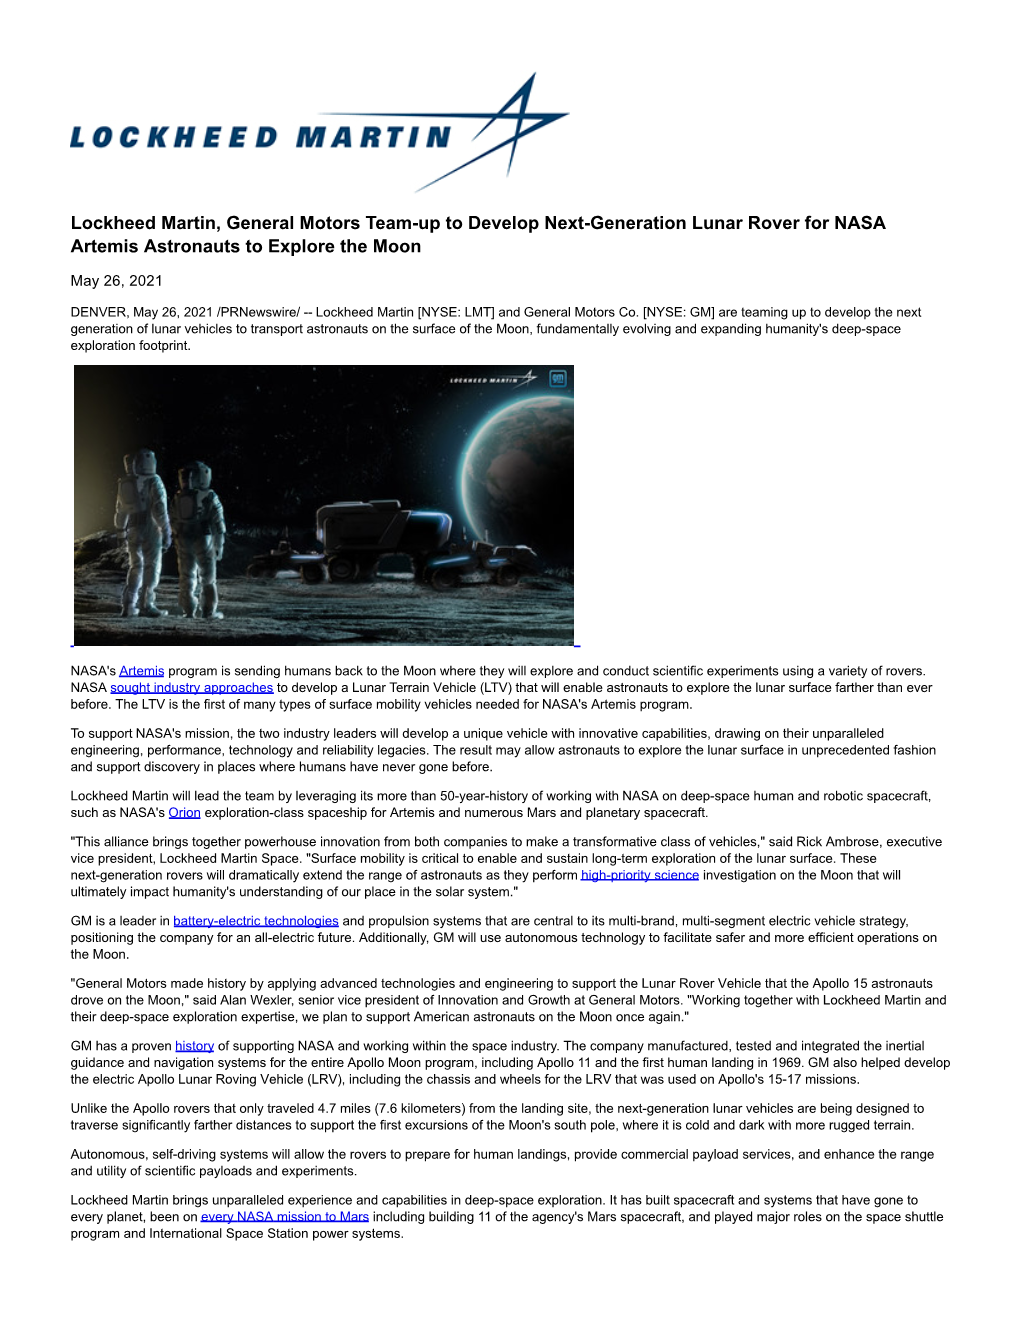 Lockheed Martin, General Motors Team-Up to Develop Next-Generation Lunar Rover for NASA Artemis Astronauts to Explore the Moon